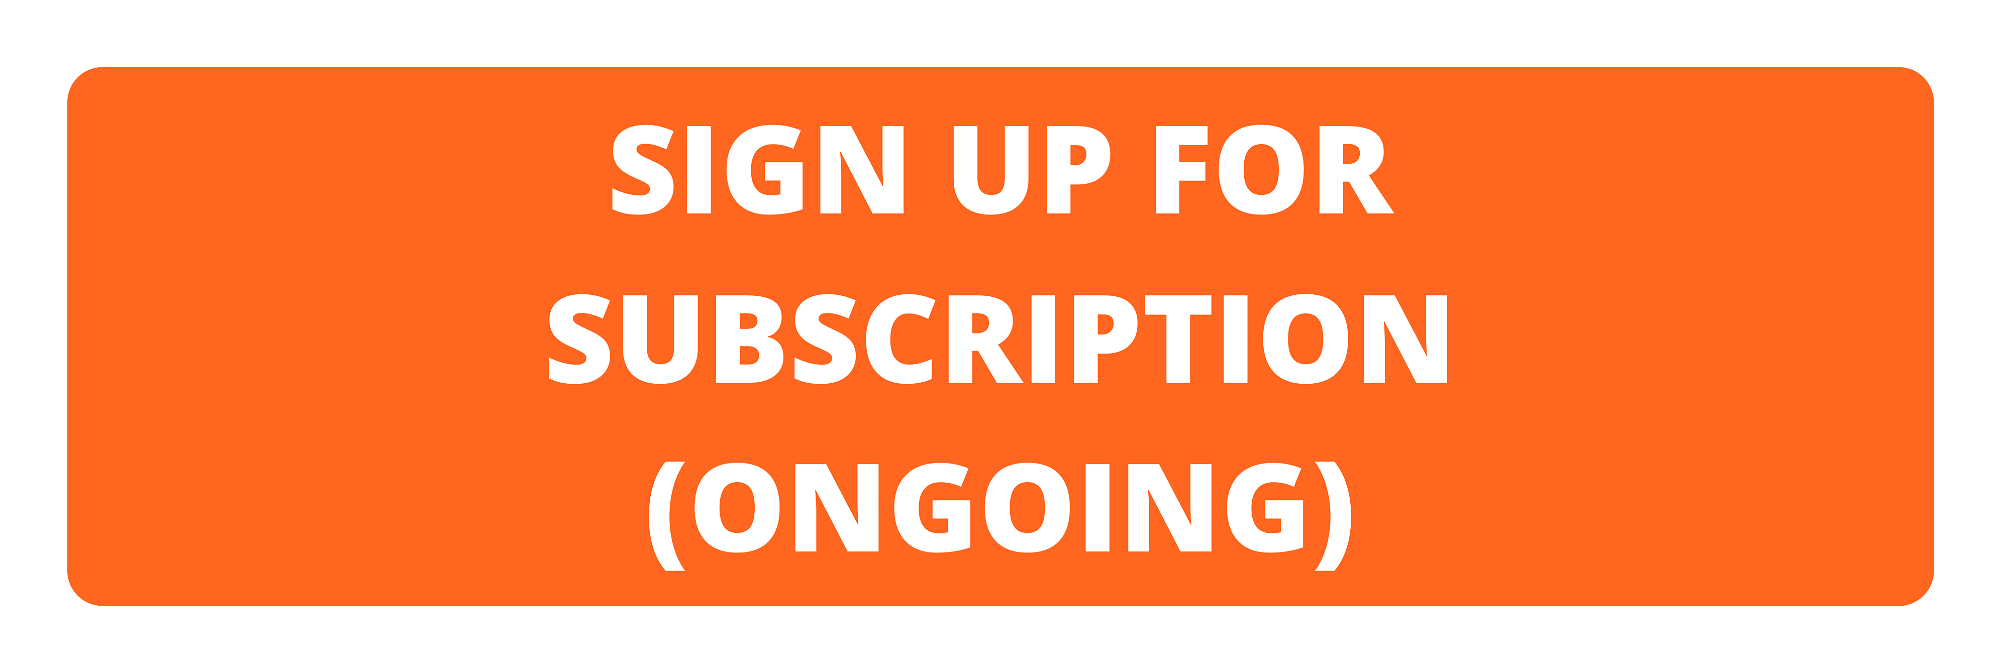 sign up for subscription (ongoing)